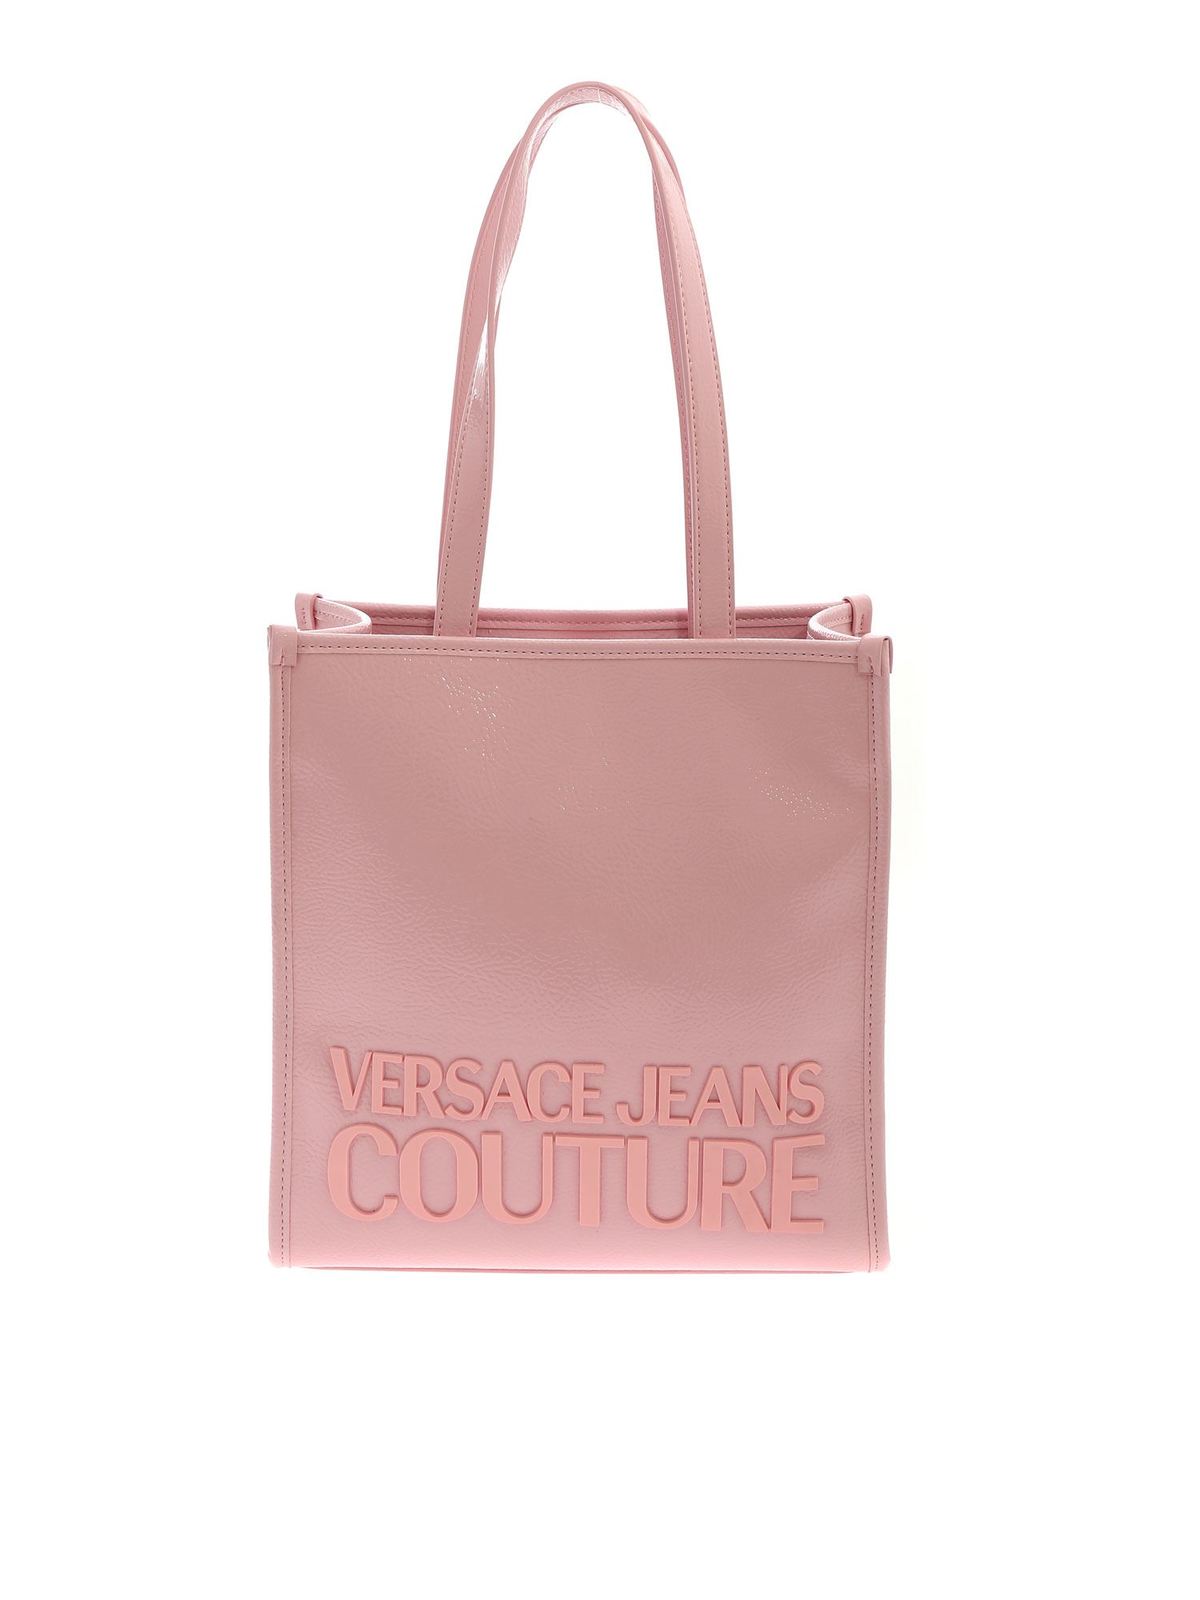 VERSACE JEANS COUTURE トートバッグ ピンク